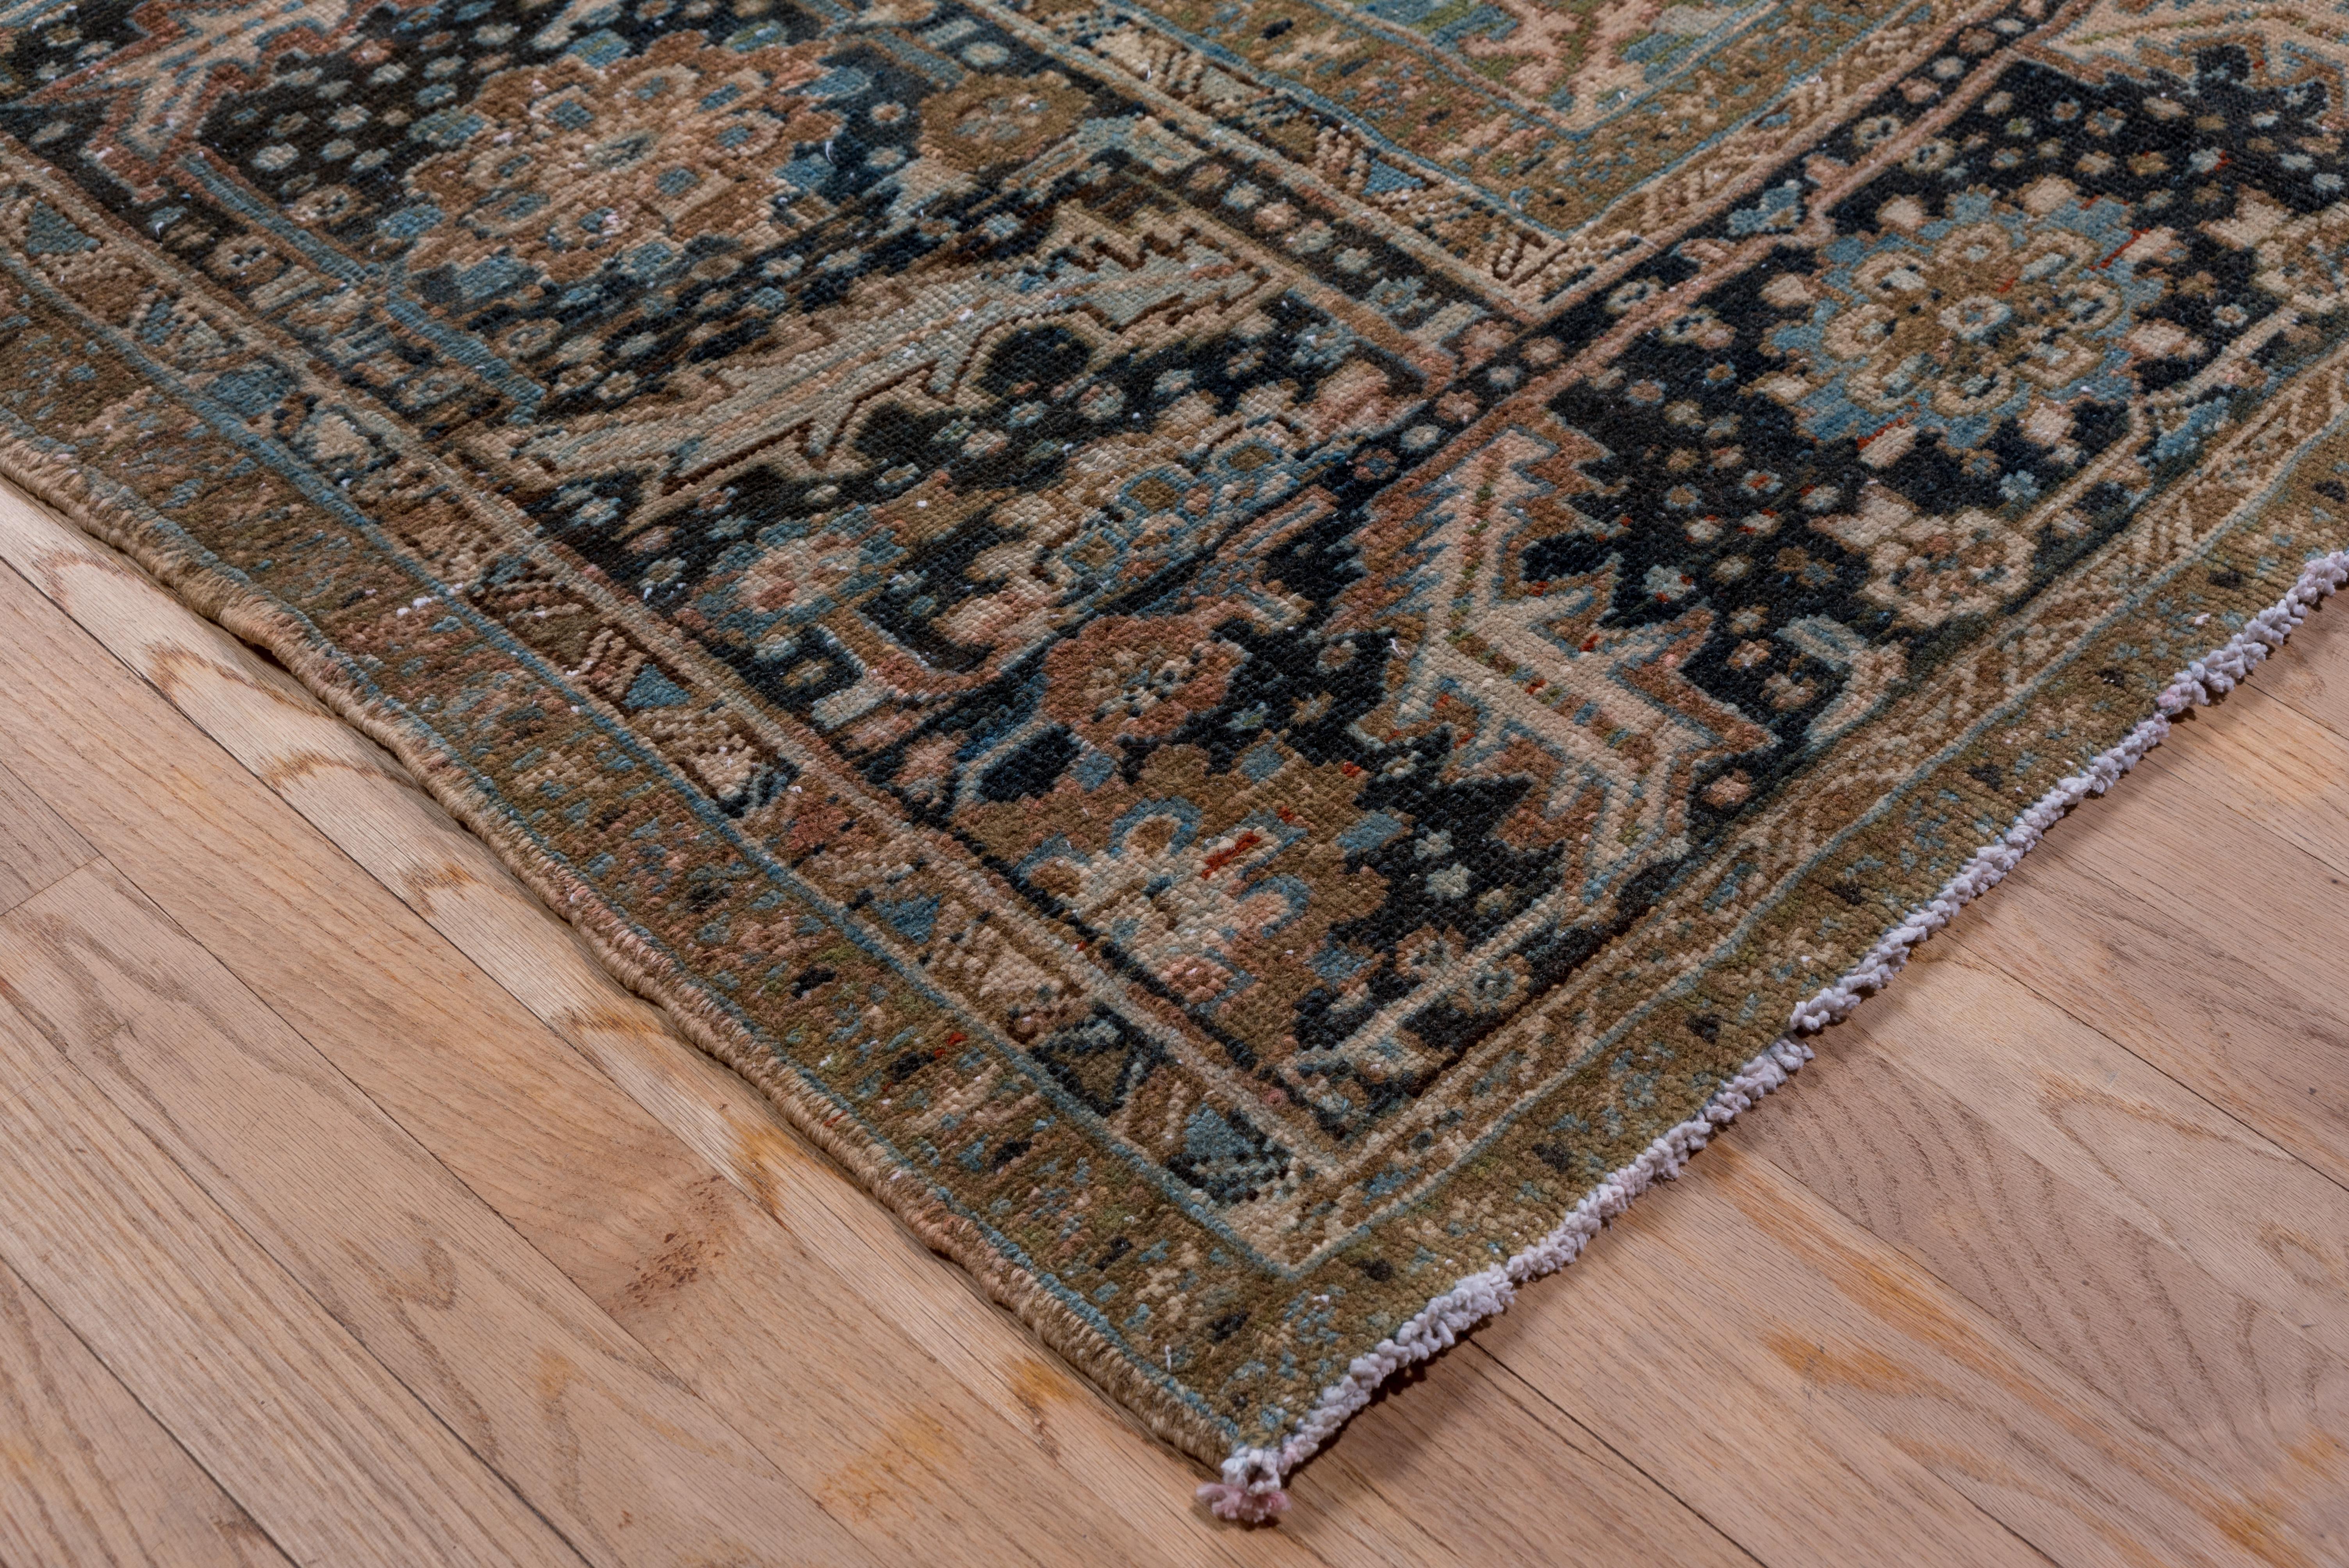 This NW Persian rustic carpet shows a rare gently scalloped round navy medallion enclosing overlapping long leaves and palmettes around an ecru octofoil centre. Soft rose field, ivory and arabesque corners, and a navy bent leaf, rosette and dot